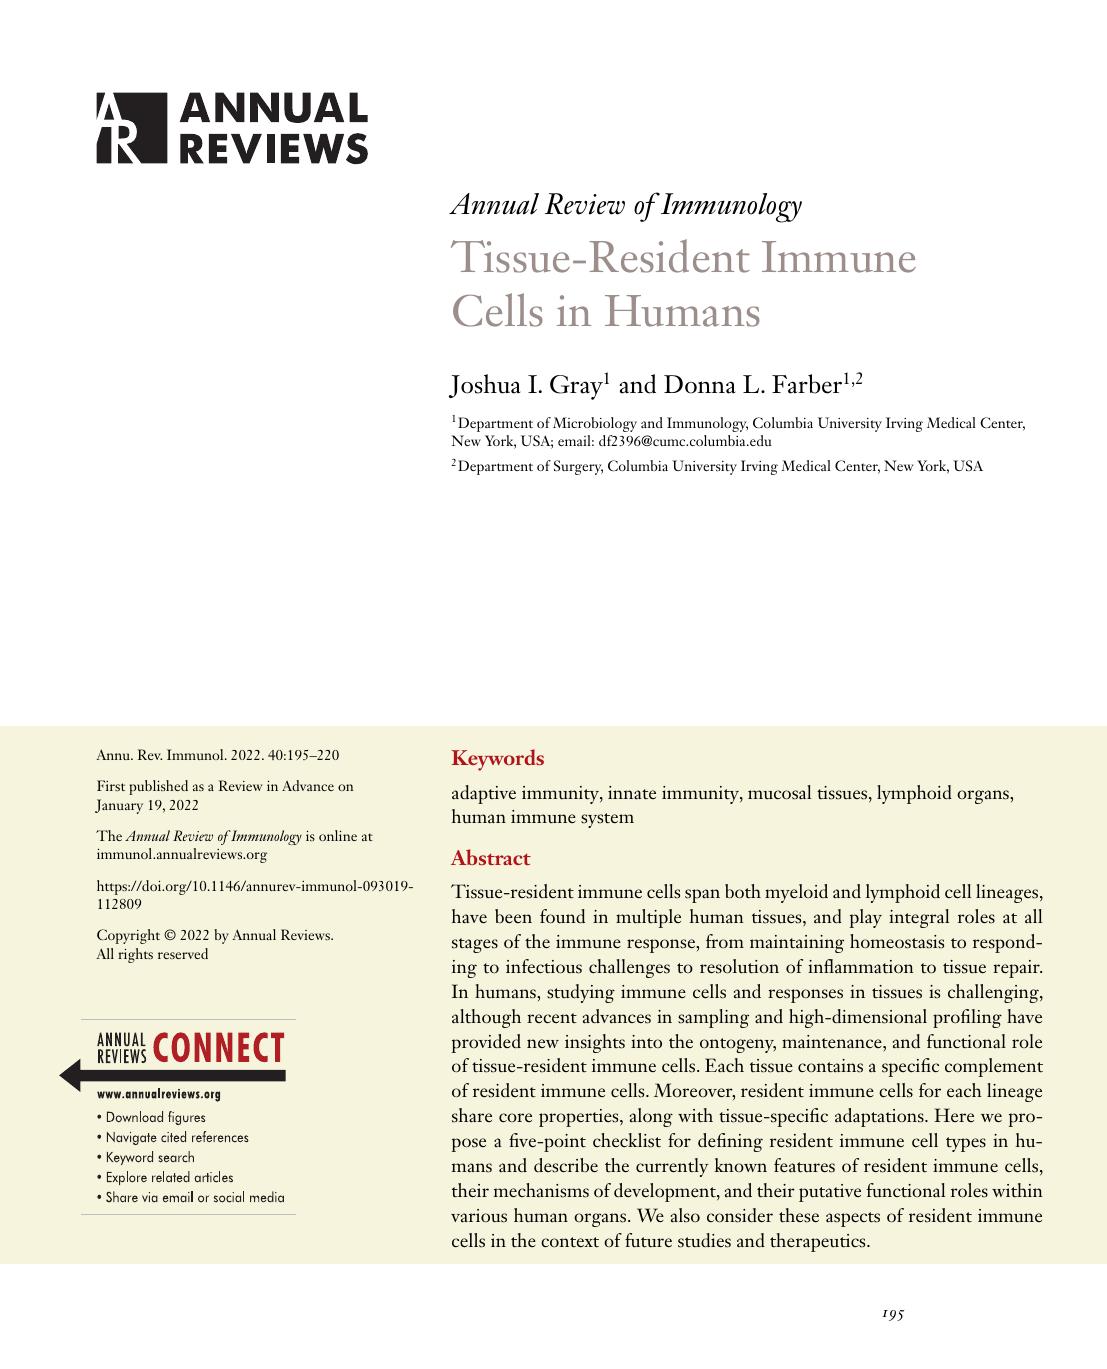 Tissue-Resident Immune Cells in Humans by Joshua I. Gray and Donna L. Farber